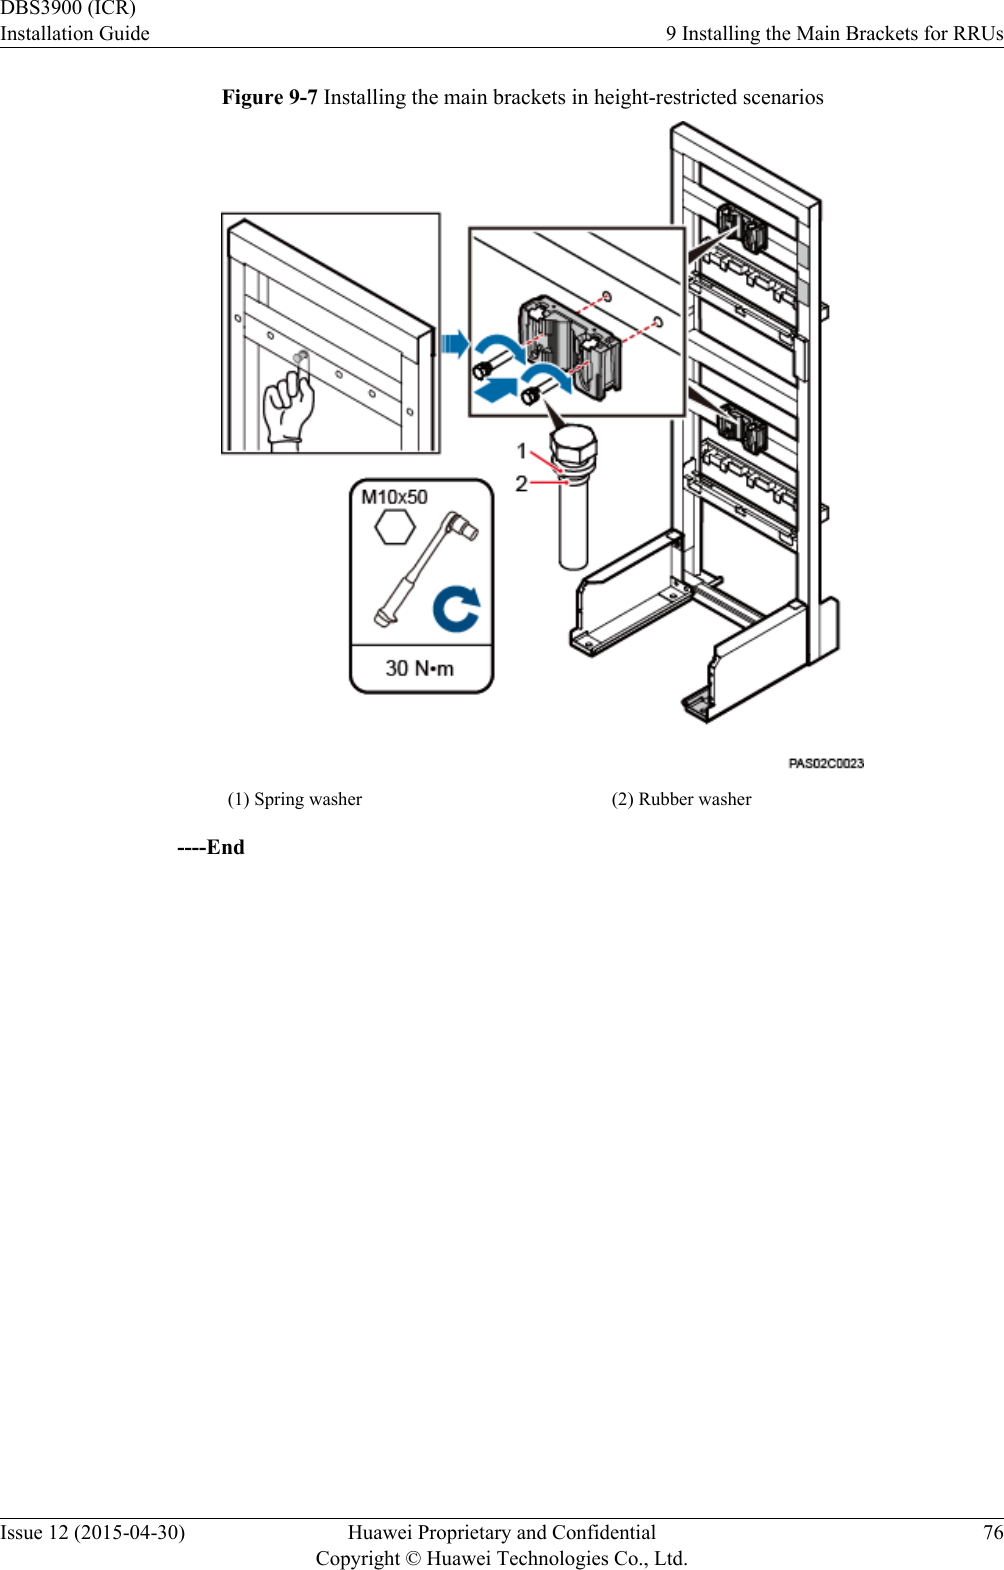 Figure 9-7 Installing the main brackets in height-restricted scenarios(1) Spring washer (2) Rubber washer----EndDBS3900 (ICR)Installation Guide 9 Installing the Main Brackets for RRUsIssue 12 (2015-04-30) Huawei Proprietary and ConfidentialCopyright © Huawei Technologies Co., Ltd.76